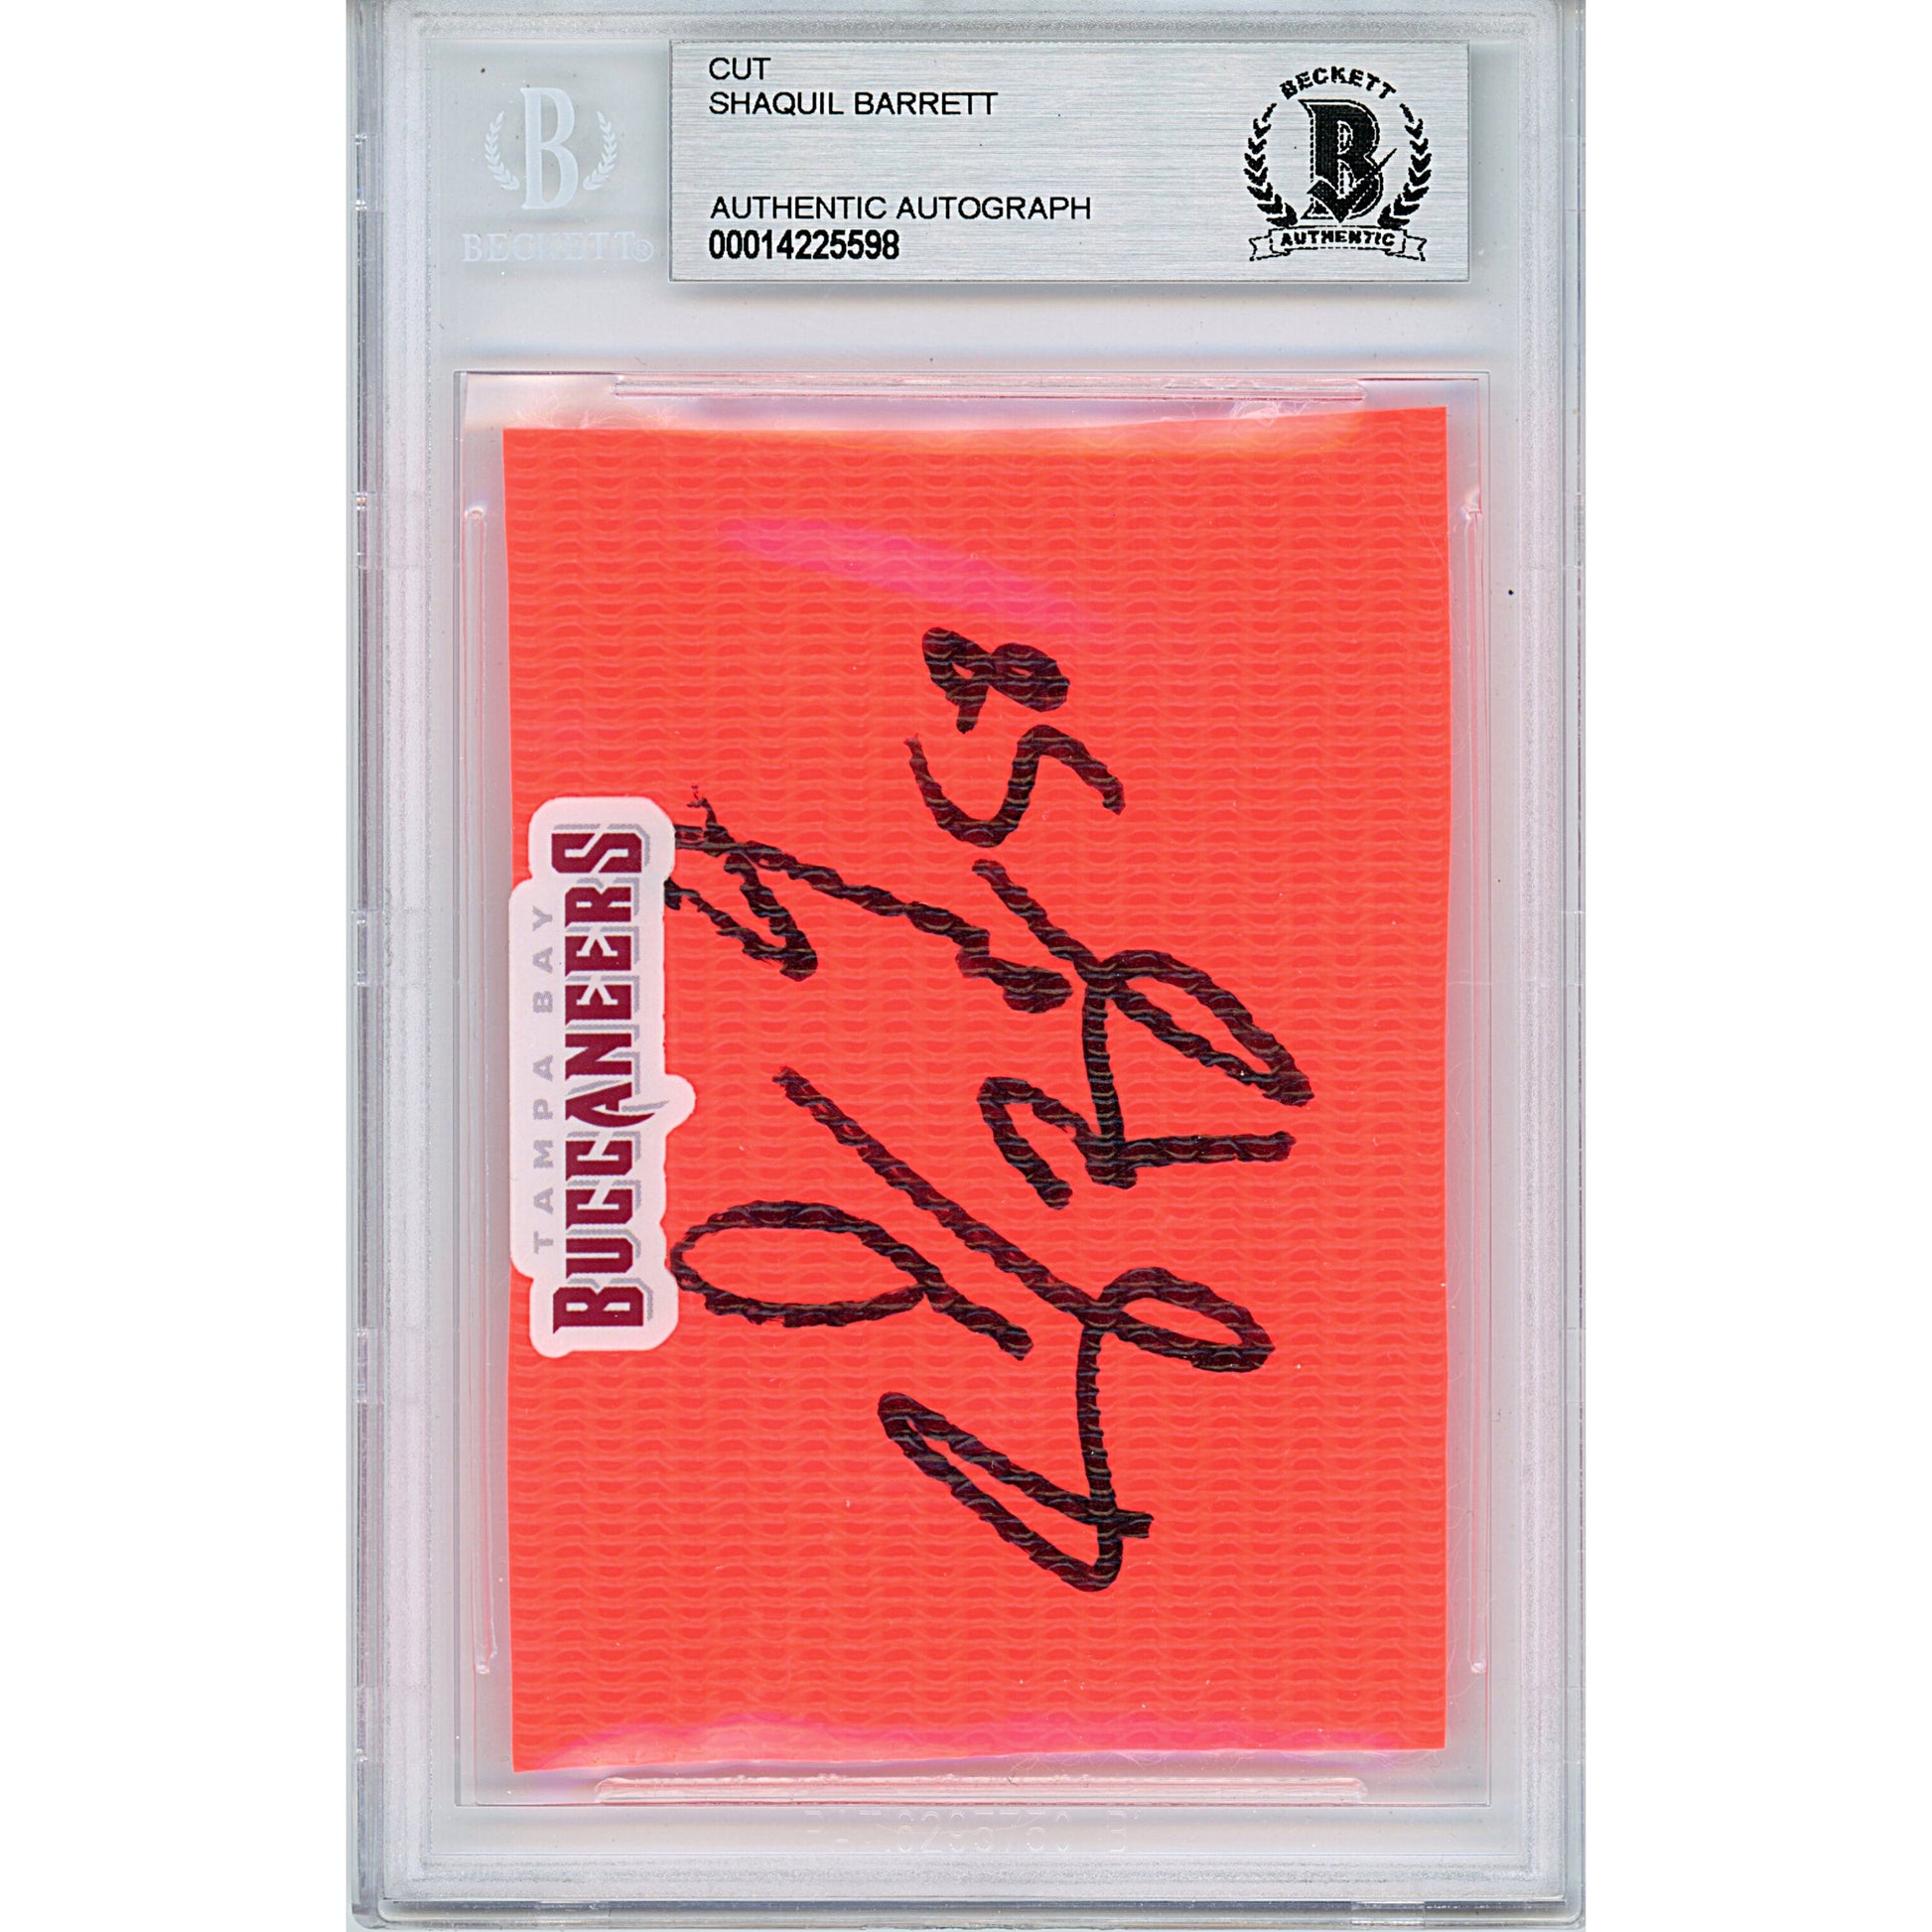 Footballs- Autographed- Shaquil Barrett Signed Tampa Bay Buccaneers Football End Zone Pylon Piece Beckett Slabbed 00014225598 - 102